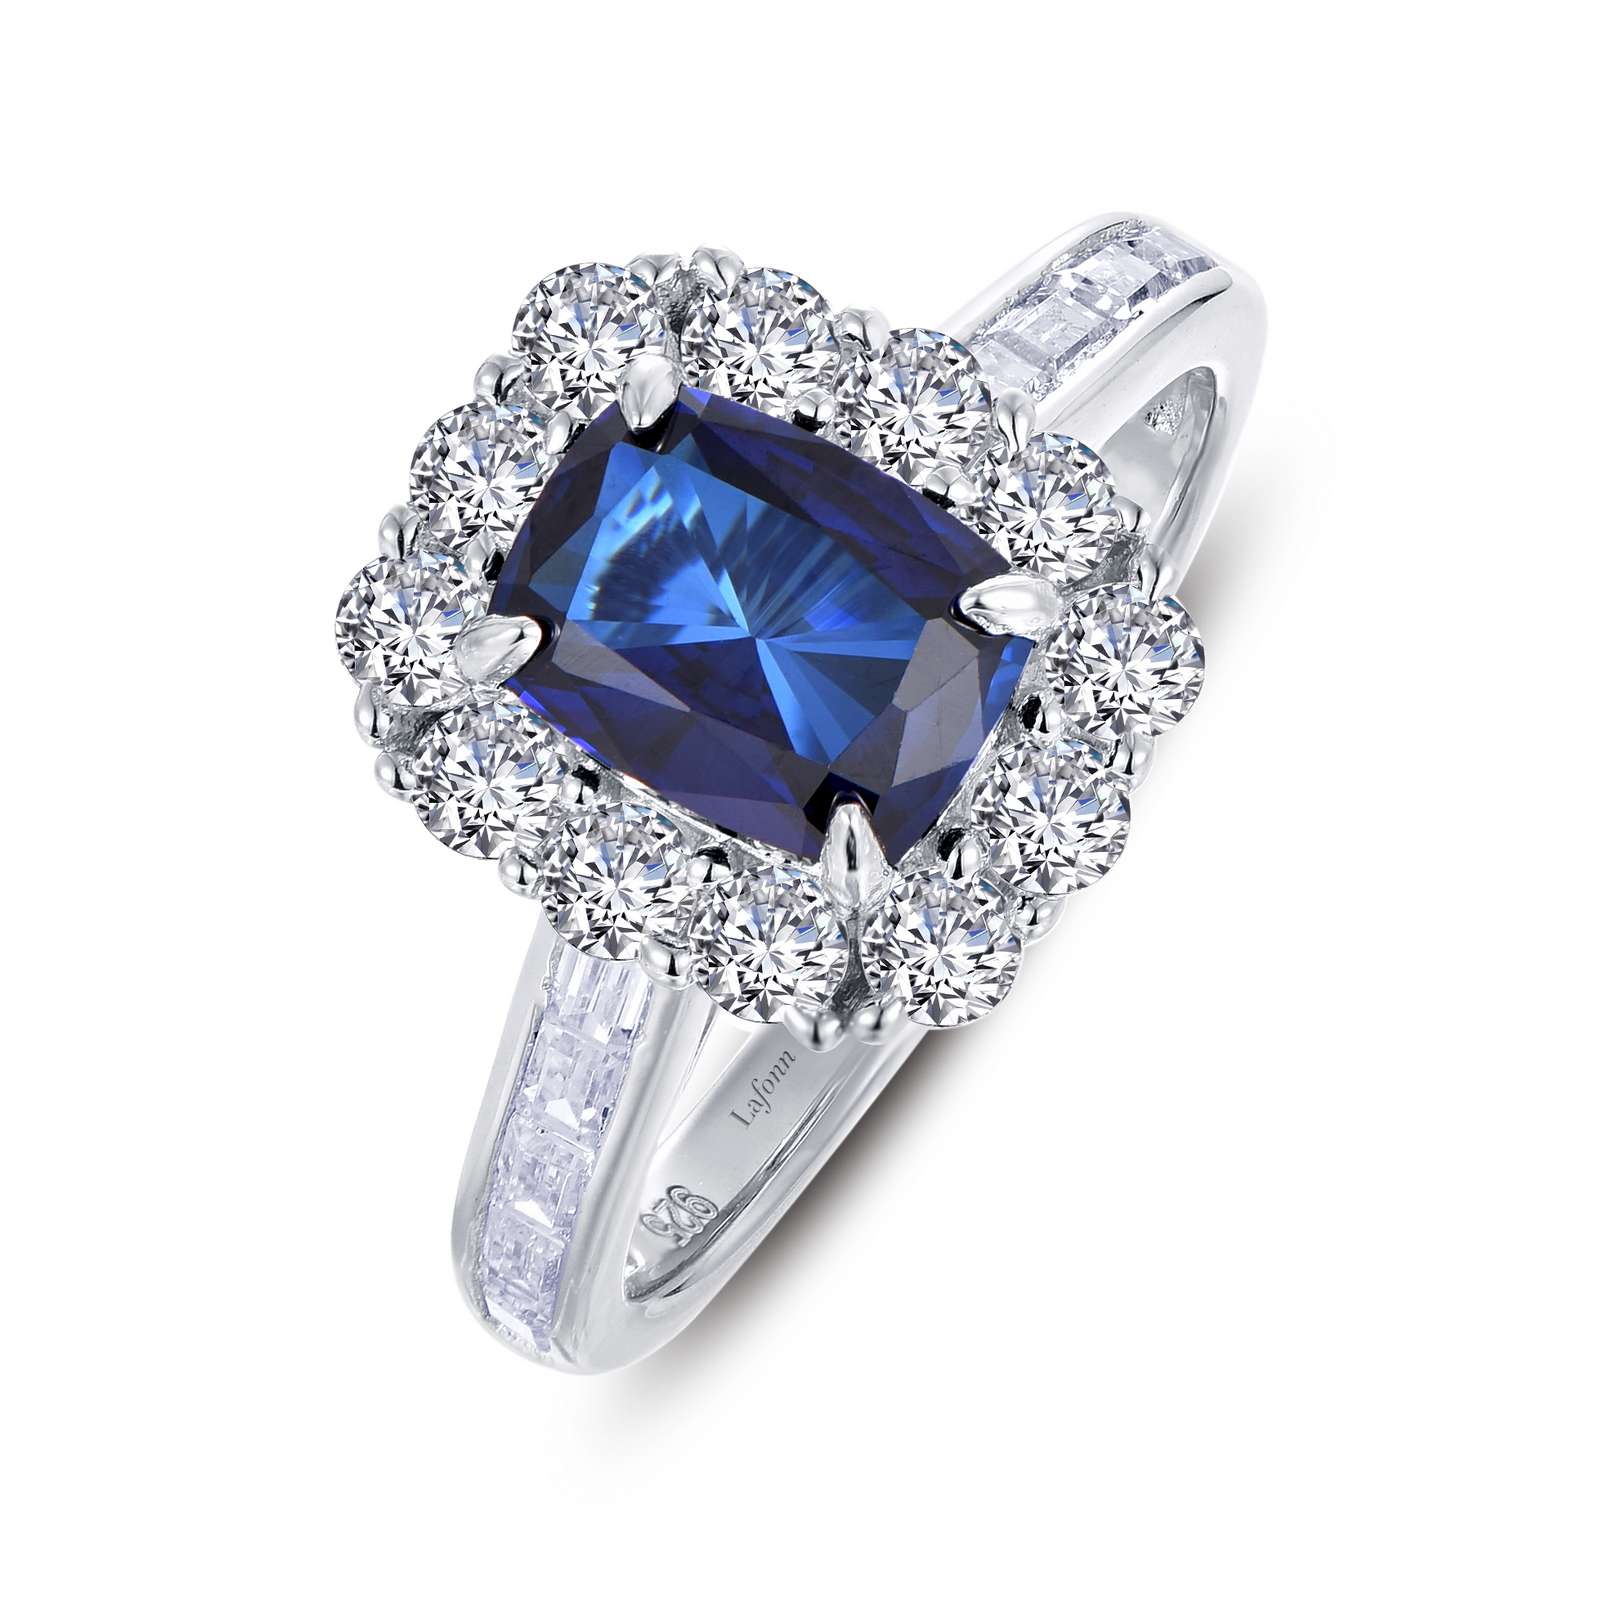 SS Cushion Cut Lab Grown 1.96ct Sapphire Ring with Round Simulated Diamond Accents & Platinum Bonding